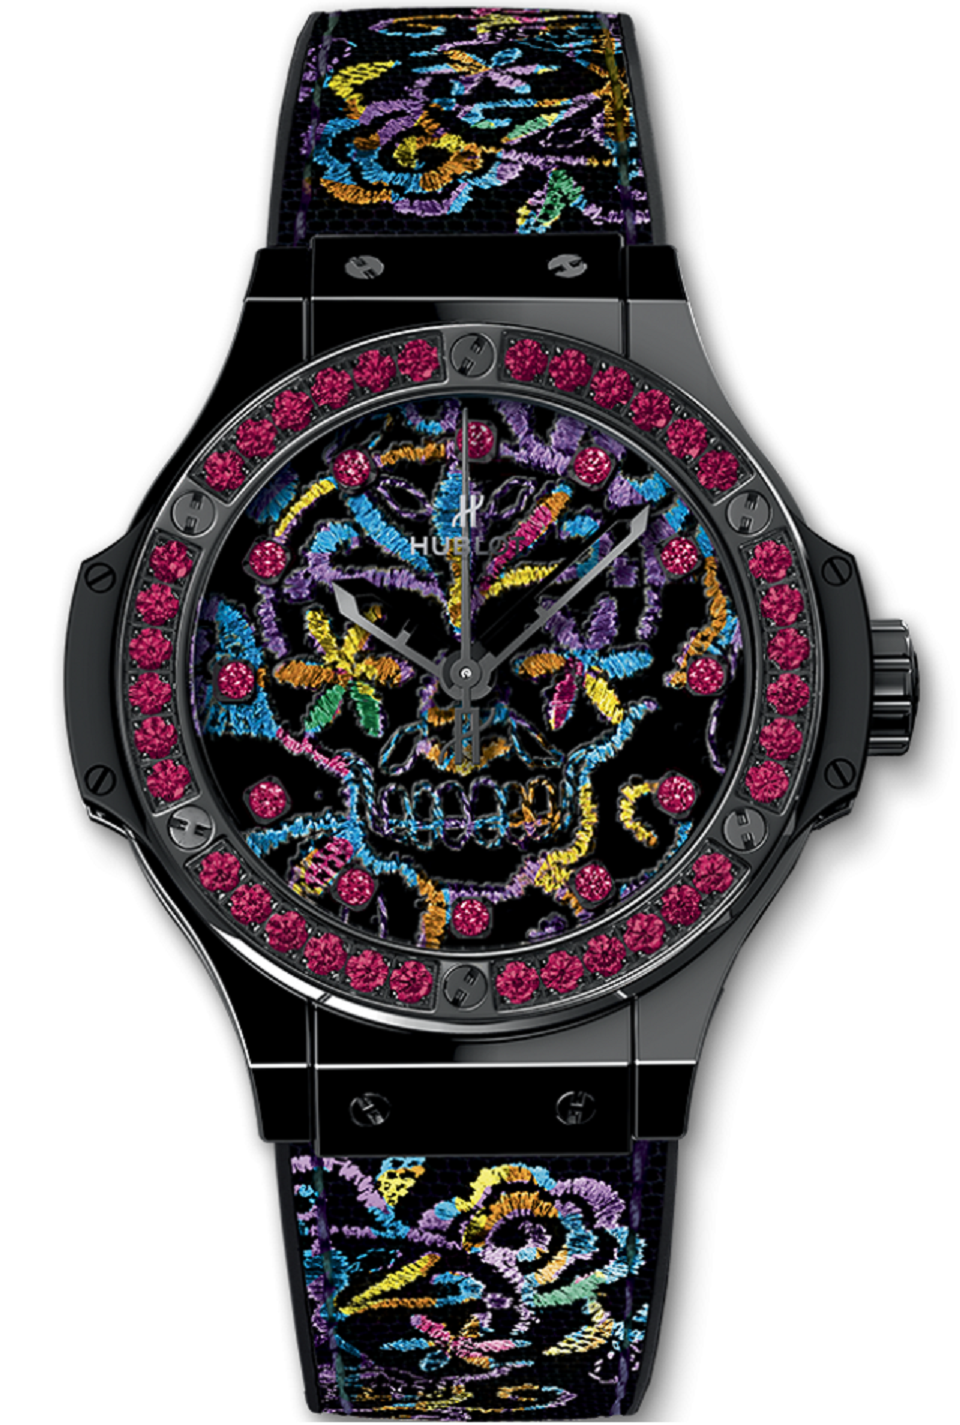 Big Bang Broderie Sugar Skull 41mm Automatic in Black Ceramic with Pink Gemstone Bezel on Black Rubber Strap with Carbon Fiber Multicolor Dial